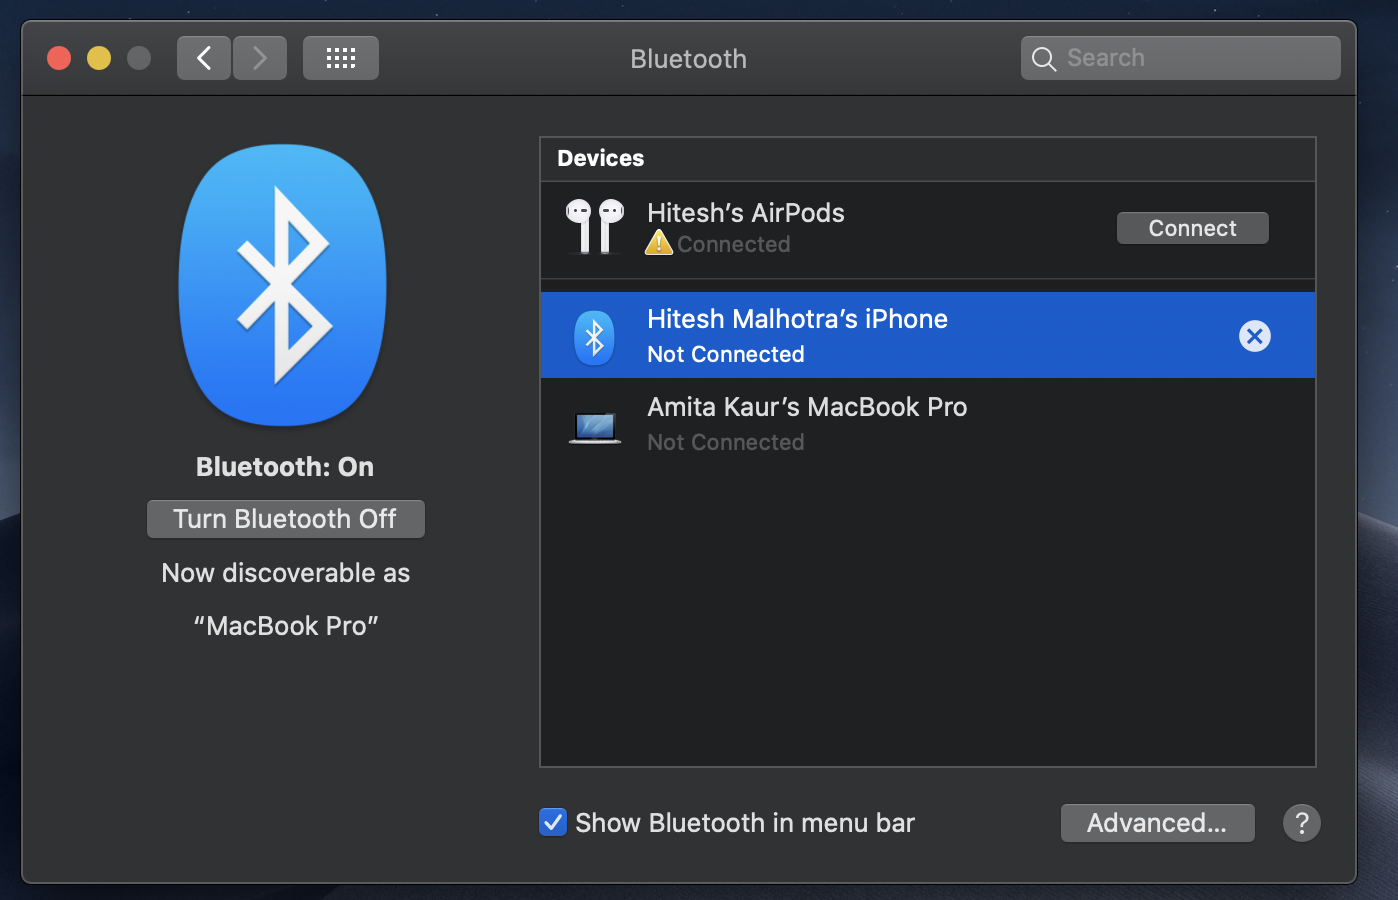 connect airpods to macbook pro. - Apple